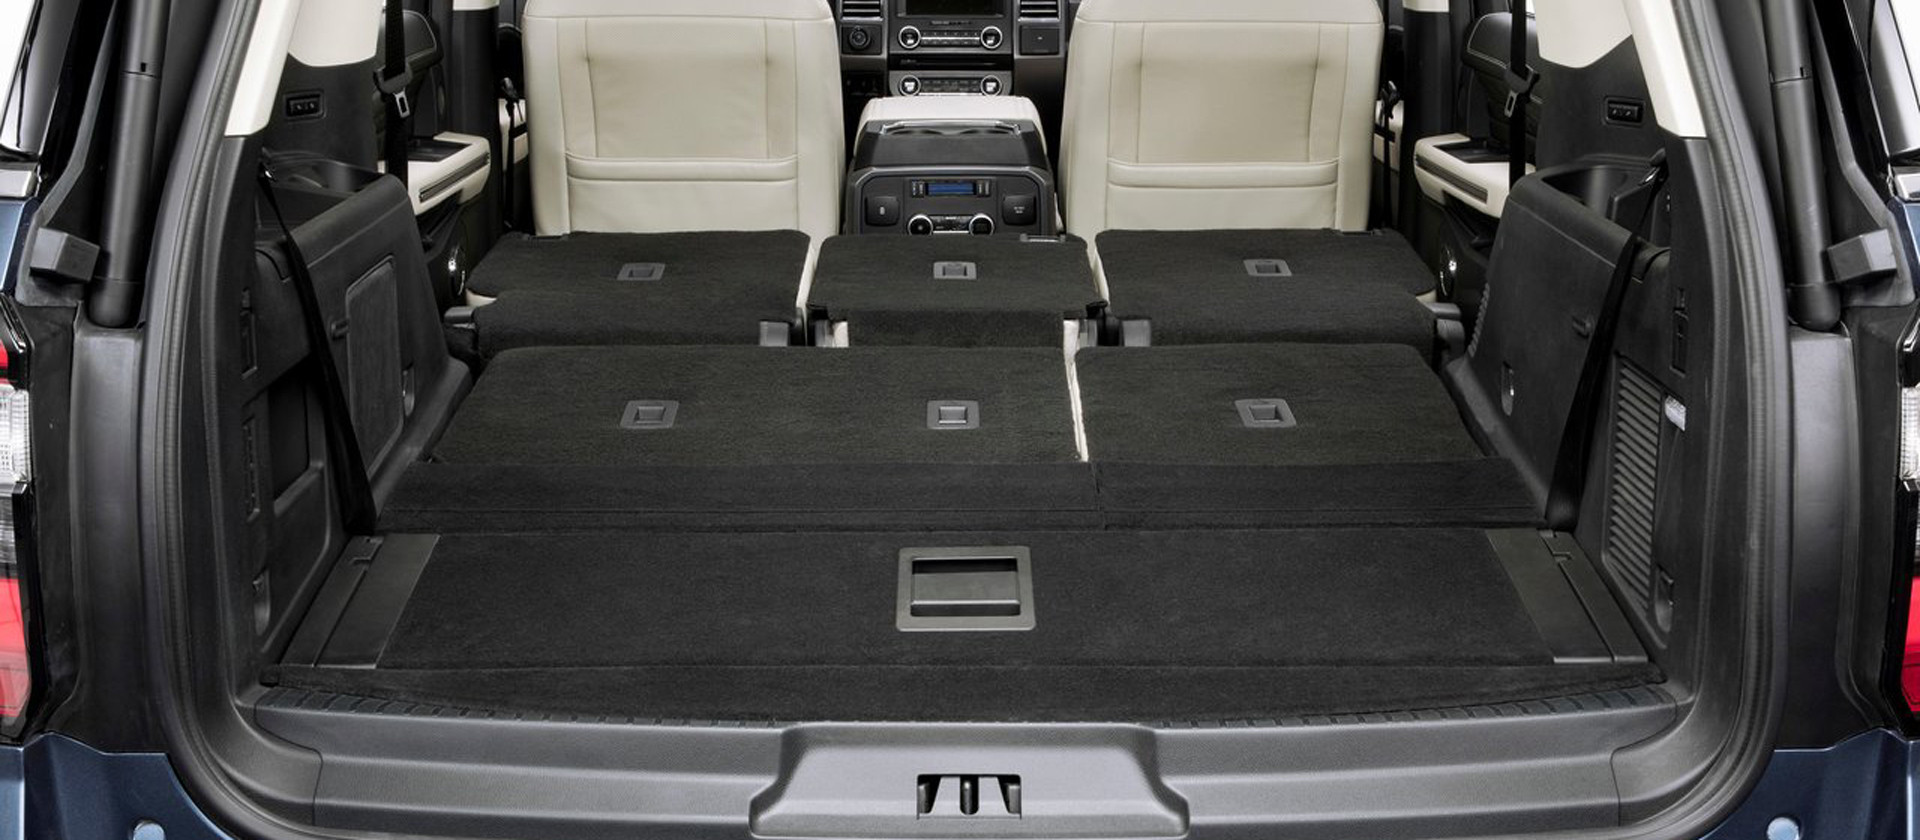 Ford Expedition back seats folded